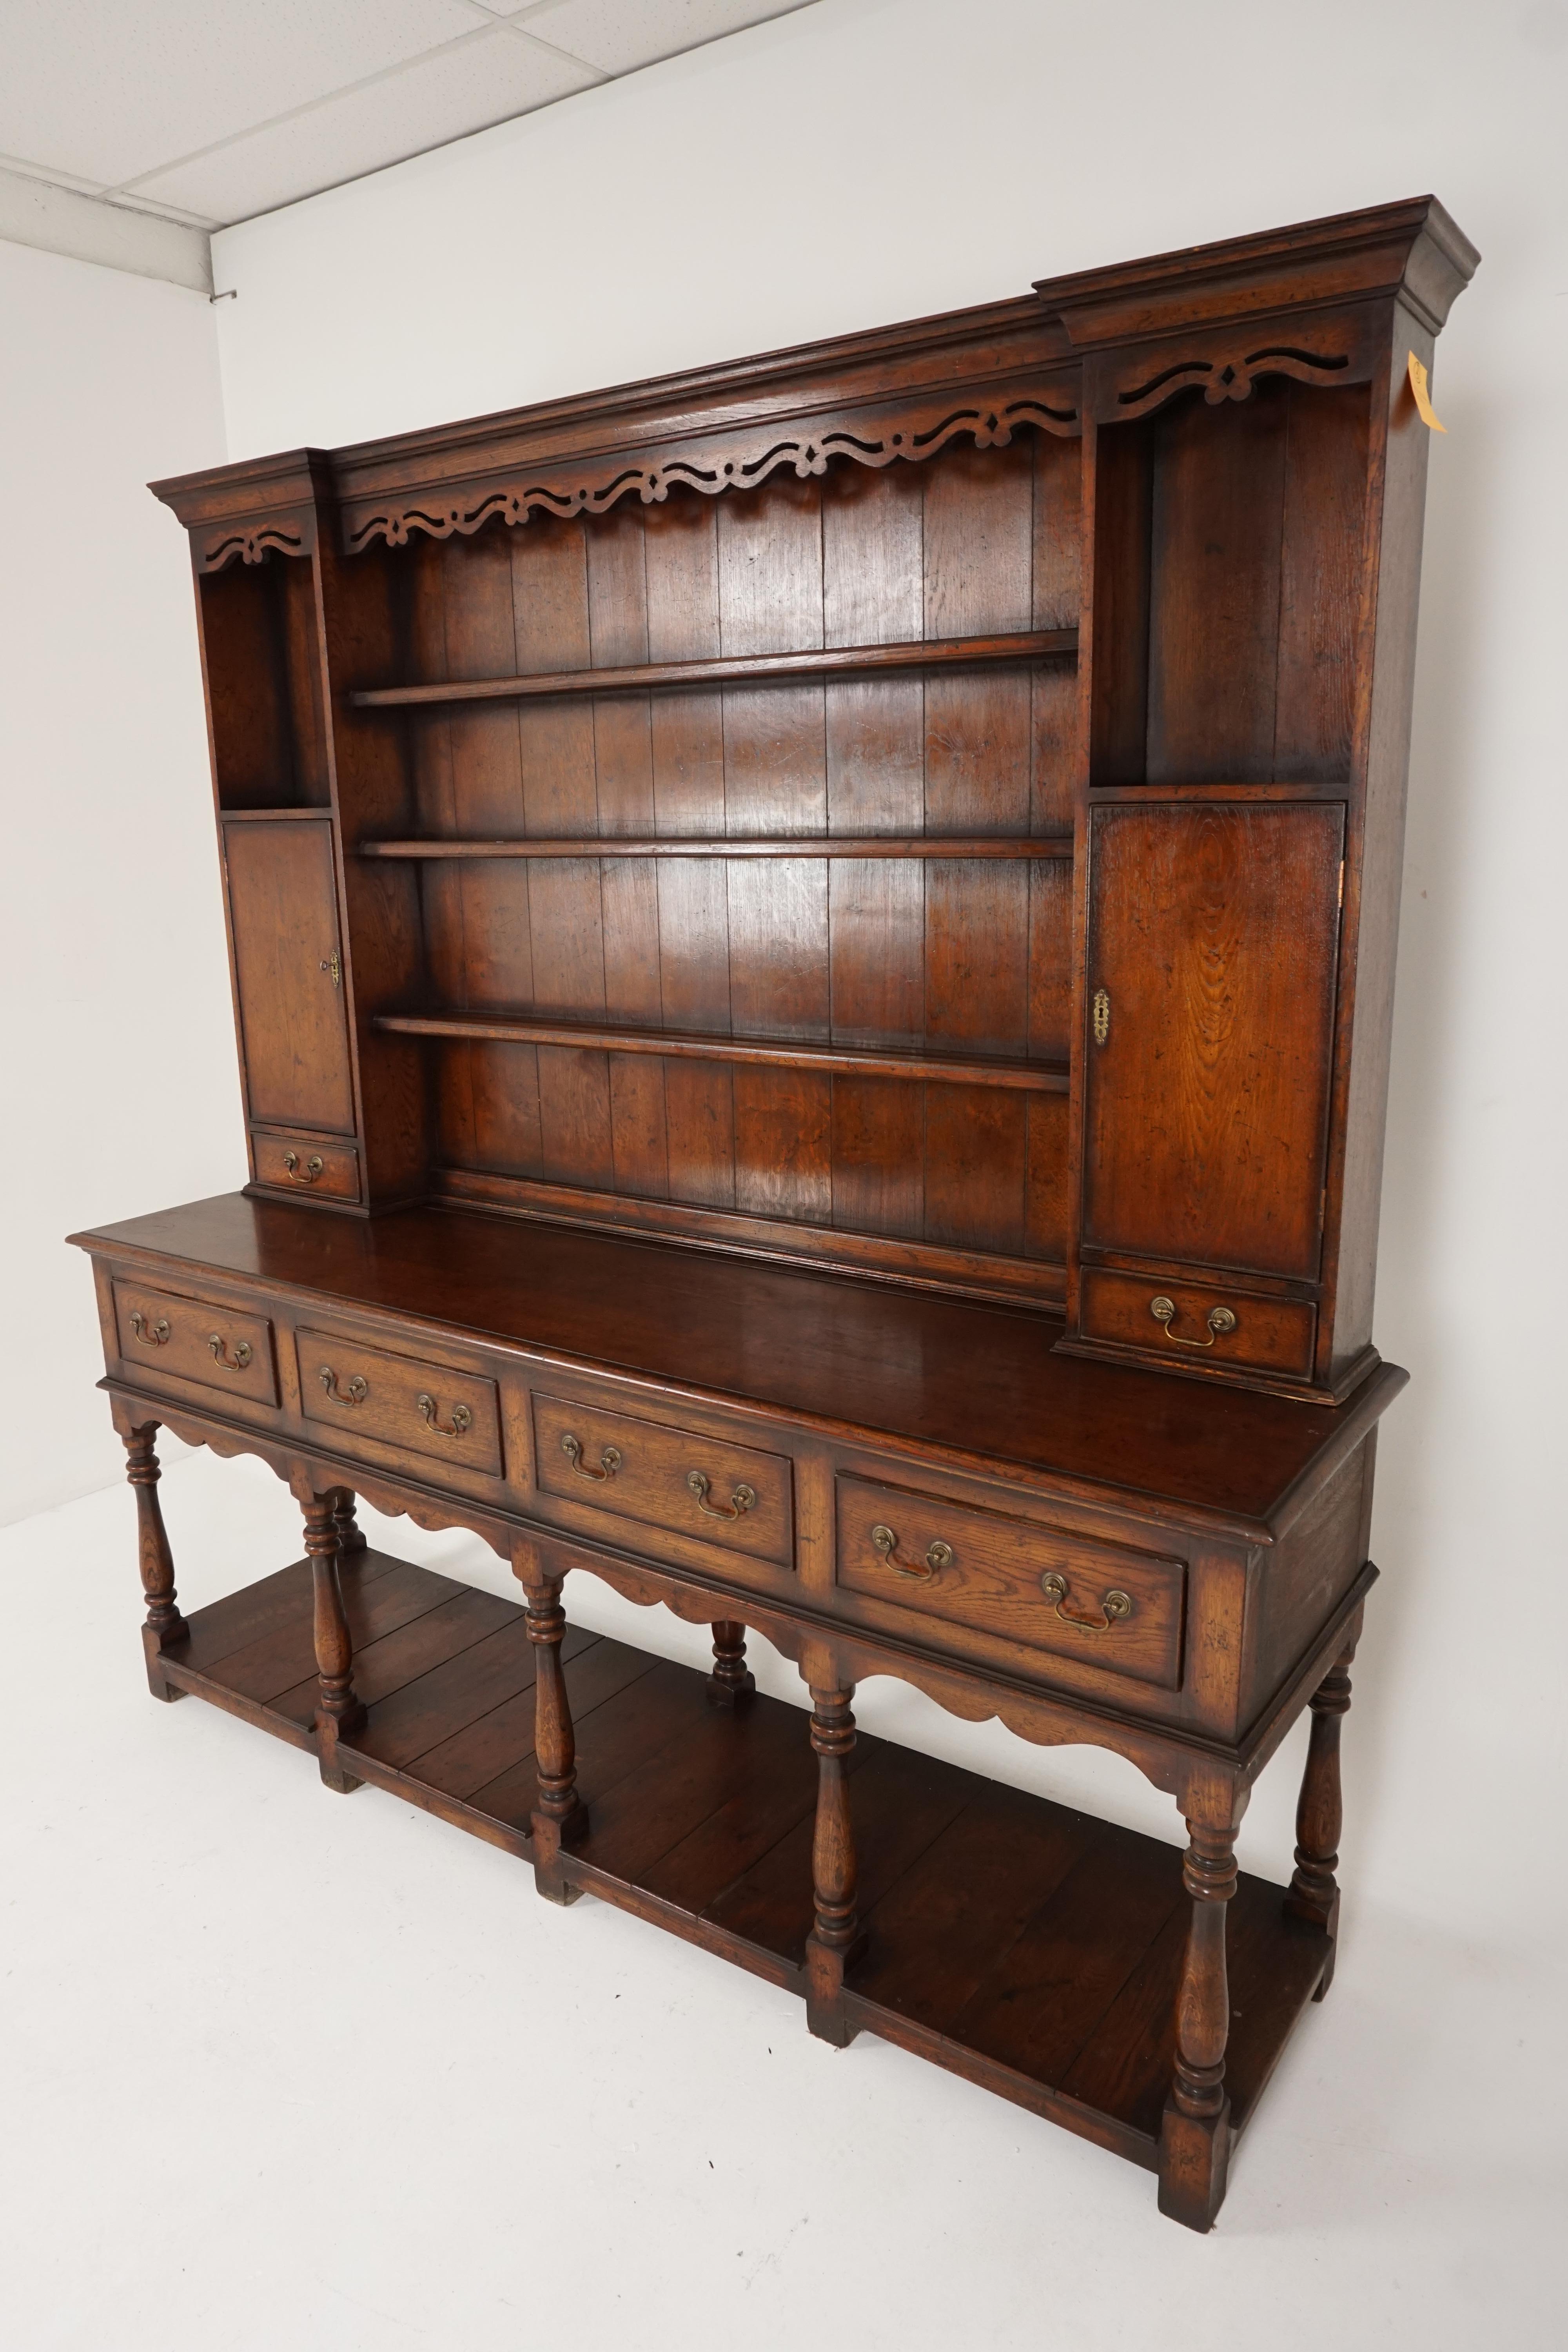 Early 20th century oak pot board welsh dresser, sideboard, Scotland 1920, B2157

Scotland 1920
Solid oak
Original finish
Protruding cornice with a lovely carved oak frieze on top
Vertical backboards
Three long and two short grooved